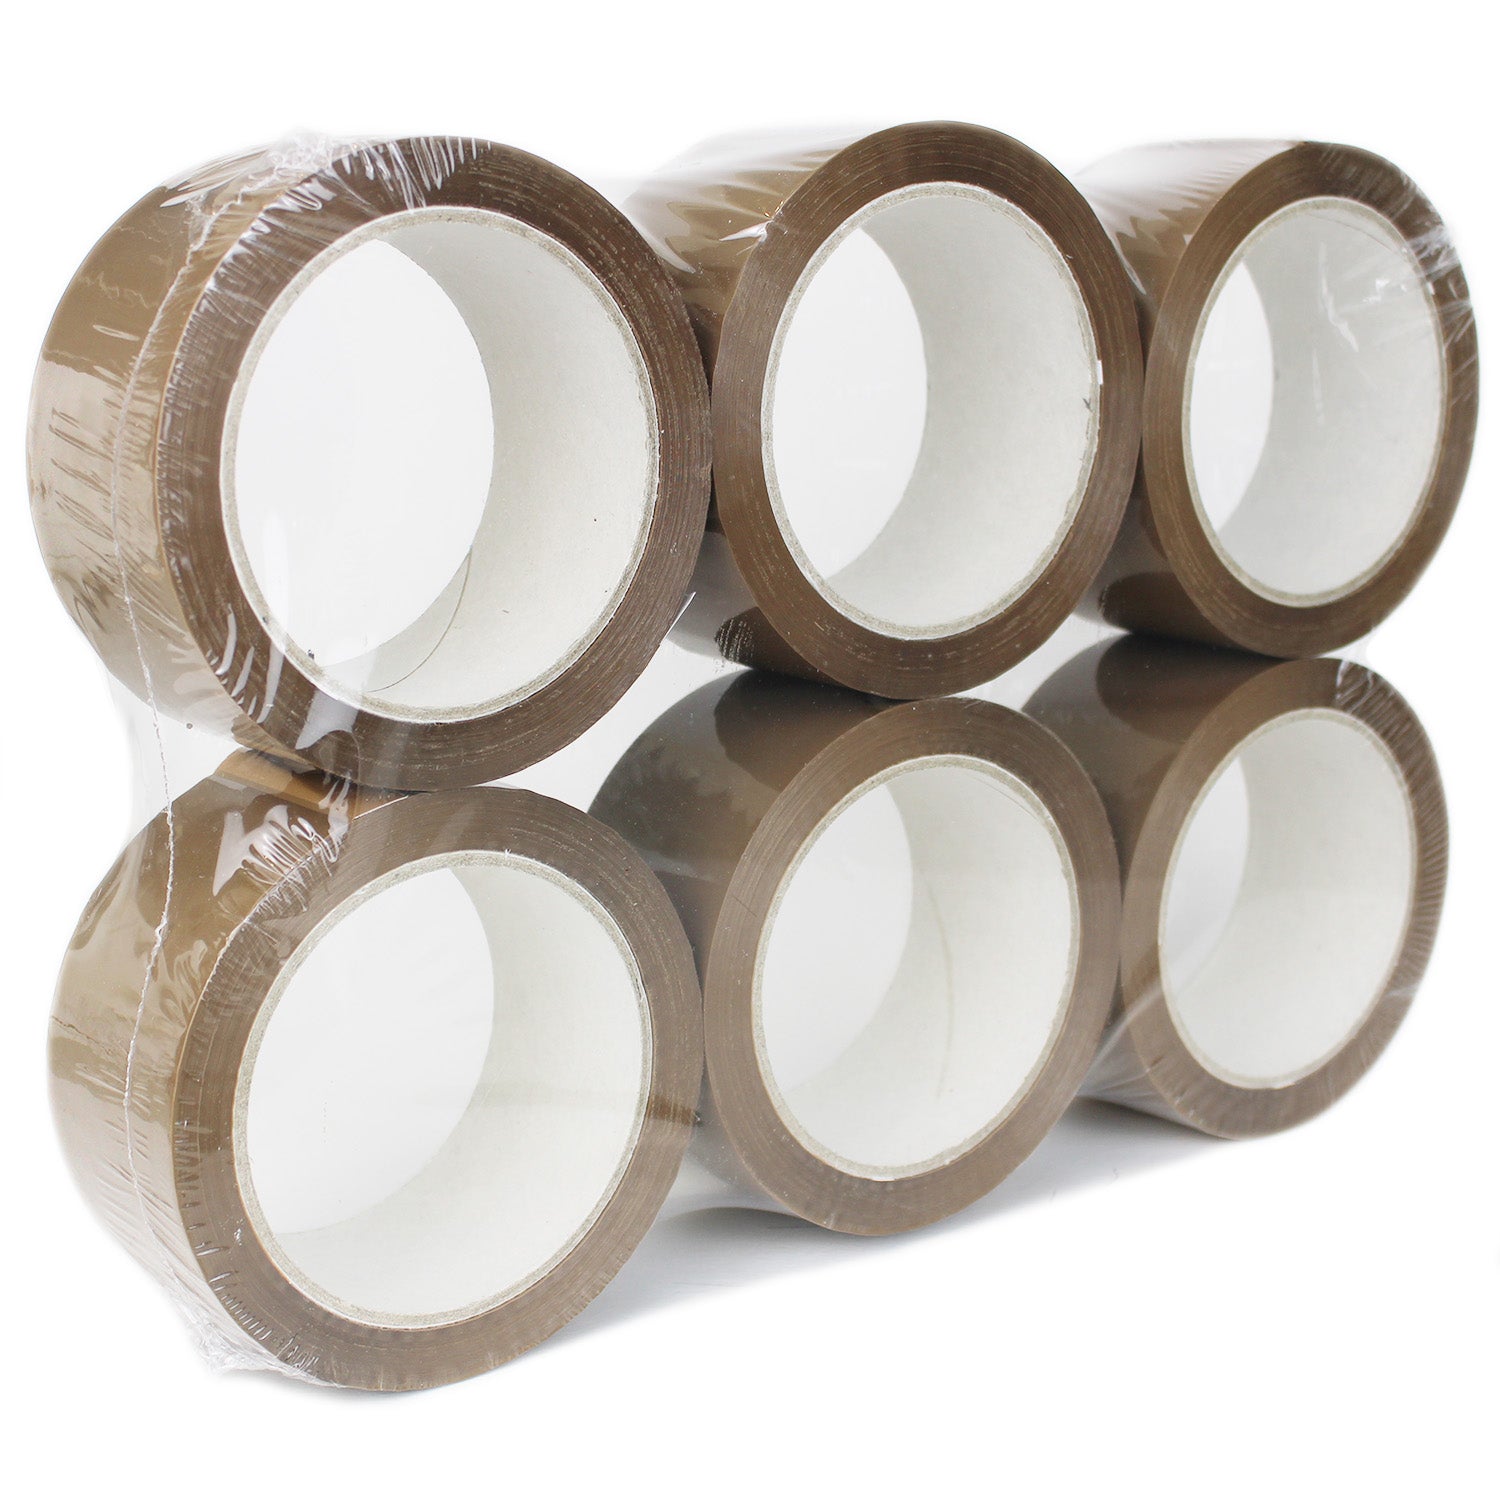 BROWN TAPE STANDARD 48mm x 66m, Pack of 6